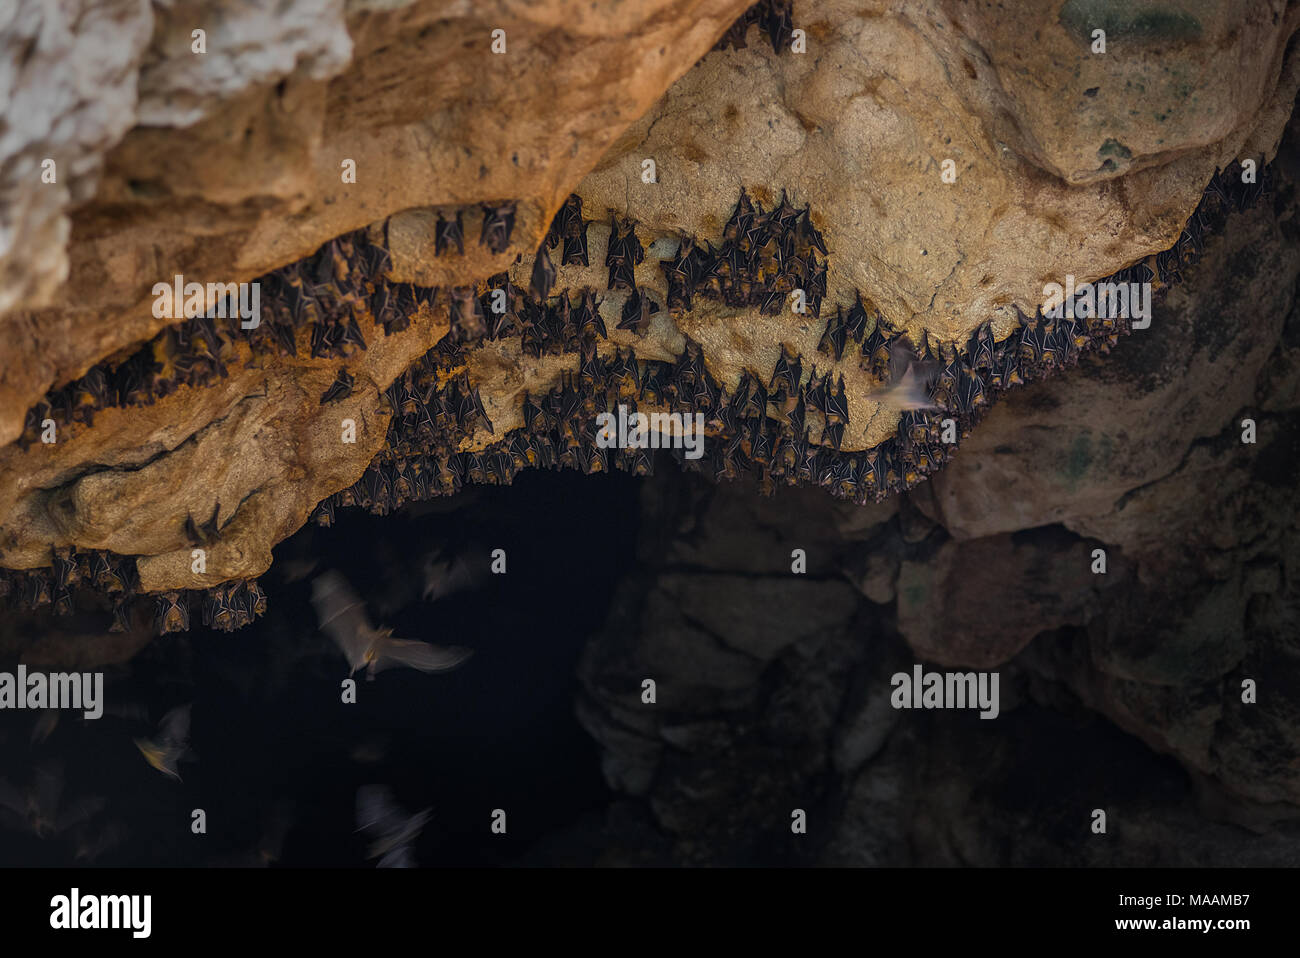 A small Colony of lesser short-nosed fruit bat roosting in a lime stone cave on the island of Sumbawa, Indonesia. Stock Photo